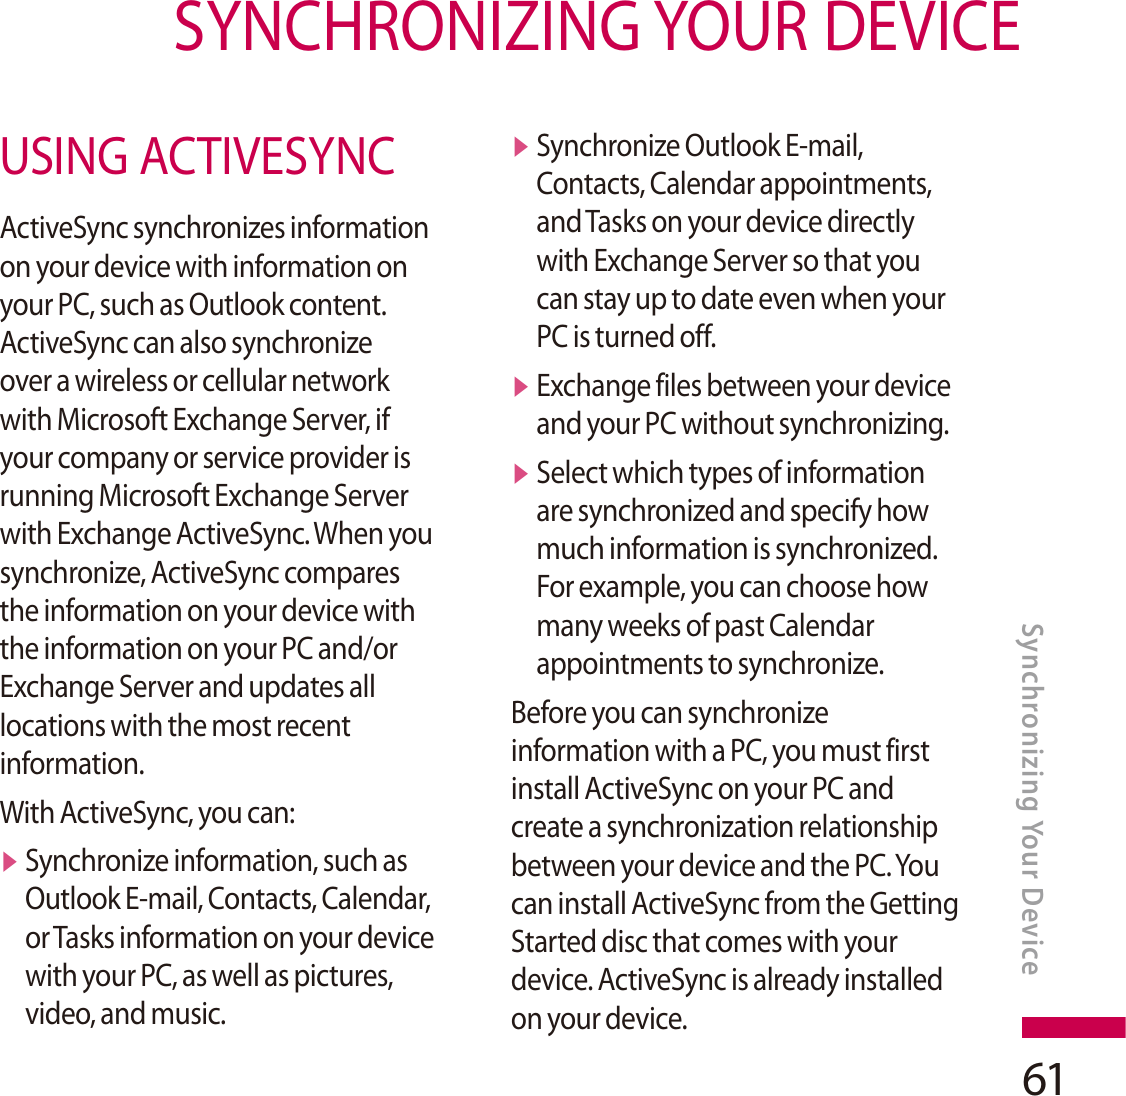 61SYNCHRONIZING YOUR DEVICESynchronizing Your DeviceUSING ACTIVESYNCActiveSync synchronizes information on your device with information on your PC, such as Outlook content. ActiveSync can also synchronize over a wireless or cellular network with Microsoft Exchange Server, if your company or service provider is running Microsoft Exchange Server with Exchange ActiveSync. When you synchronize, ActiveSync compares the information on your device with the information on your PC and/or Exchange Server and updates all locations with the most recent information.With ActiveSync, you can:vSynchronize information, such as Outlook E-mail, Contacts, Calendar, or Tasks information on your device with your PC, as well as pictures, video, and music.vSynchronize Outlook E-mail, Contacts, Calendar appointments, and Tasks on your device directly with Exchange Server so that you can stay up to date even when your PC is turned off.vExchange files between your device and your PC without synchronizing.vSelect which types of information are synchronized and specify how much information is synchronized. For example, you can choose how many weeks of past Calendar appointments to synchronize.Before you can synchronize information with a PC, you must first install ActiveSync on your PC and create a synchronization relationship between your device and the PC. You can install ActiveSync from the Getting Started disc that comes with your device. ActiveSync is already installed on your device.